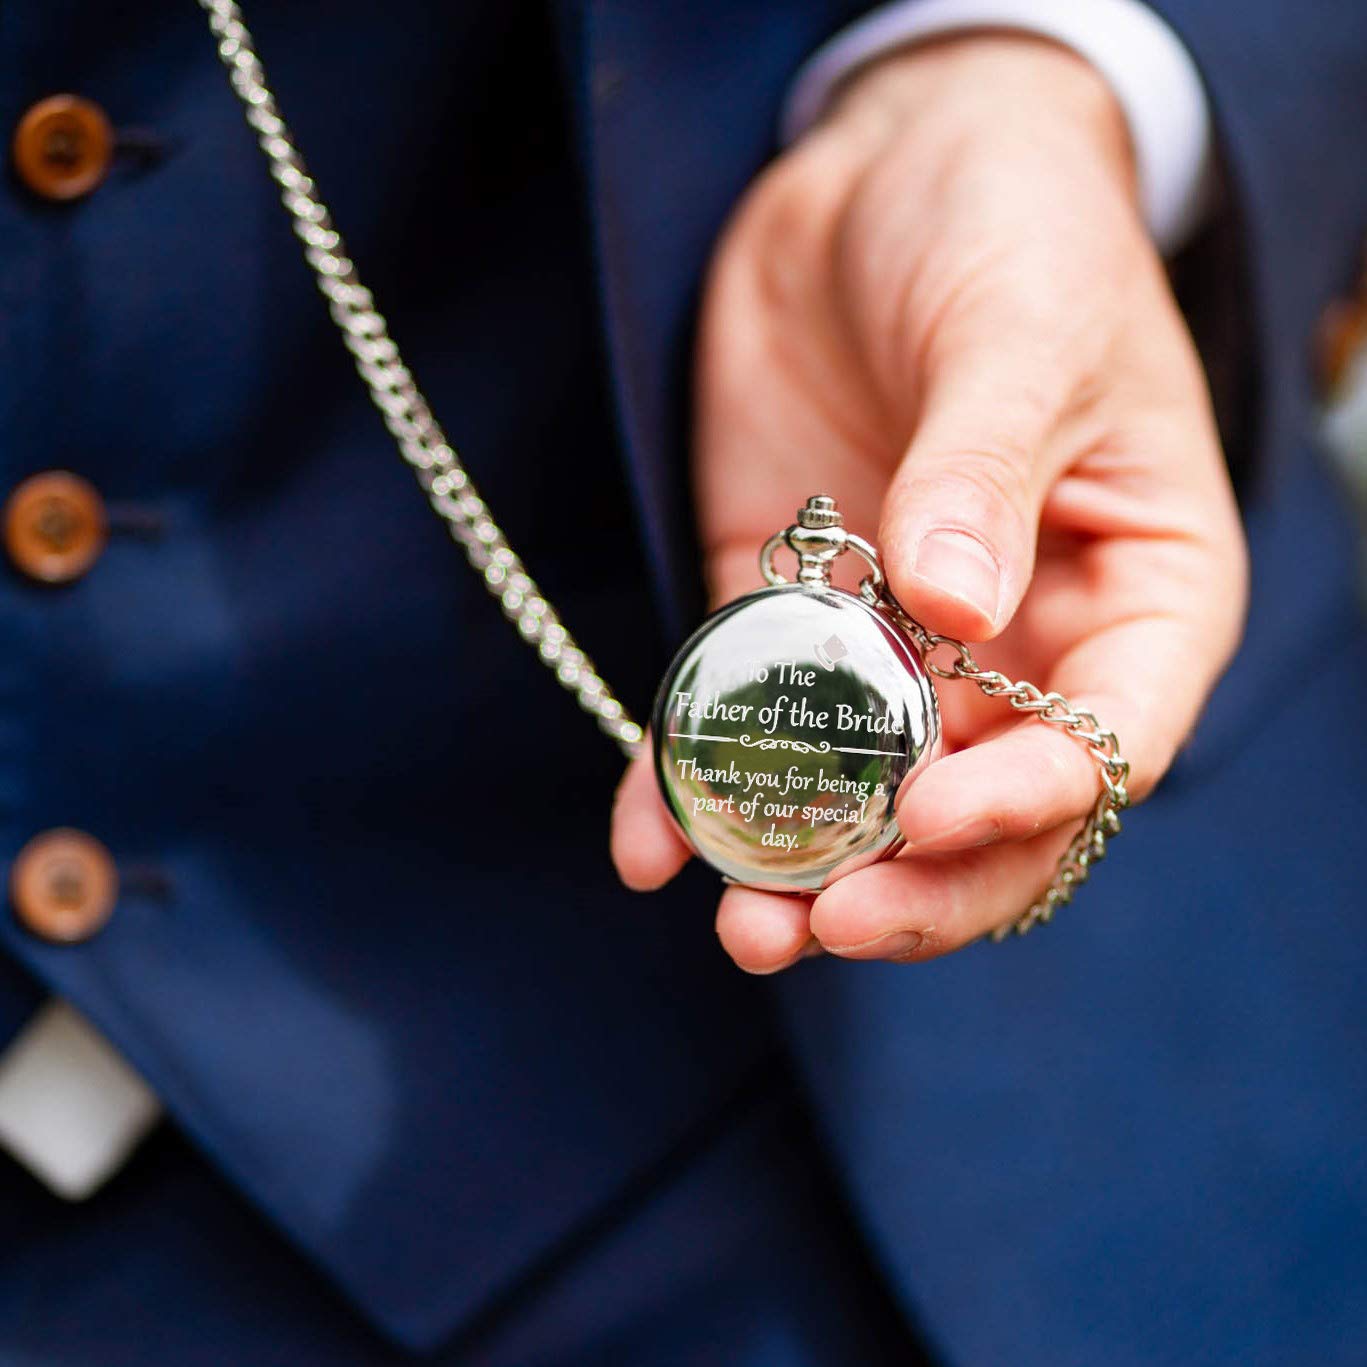 FJ FREDERICK JAMES Father of The Bride Gifts - Engraved 'Father of The Bride' Pocket Watch - Dad of The Bride Gifts for Wedding